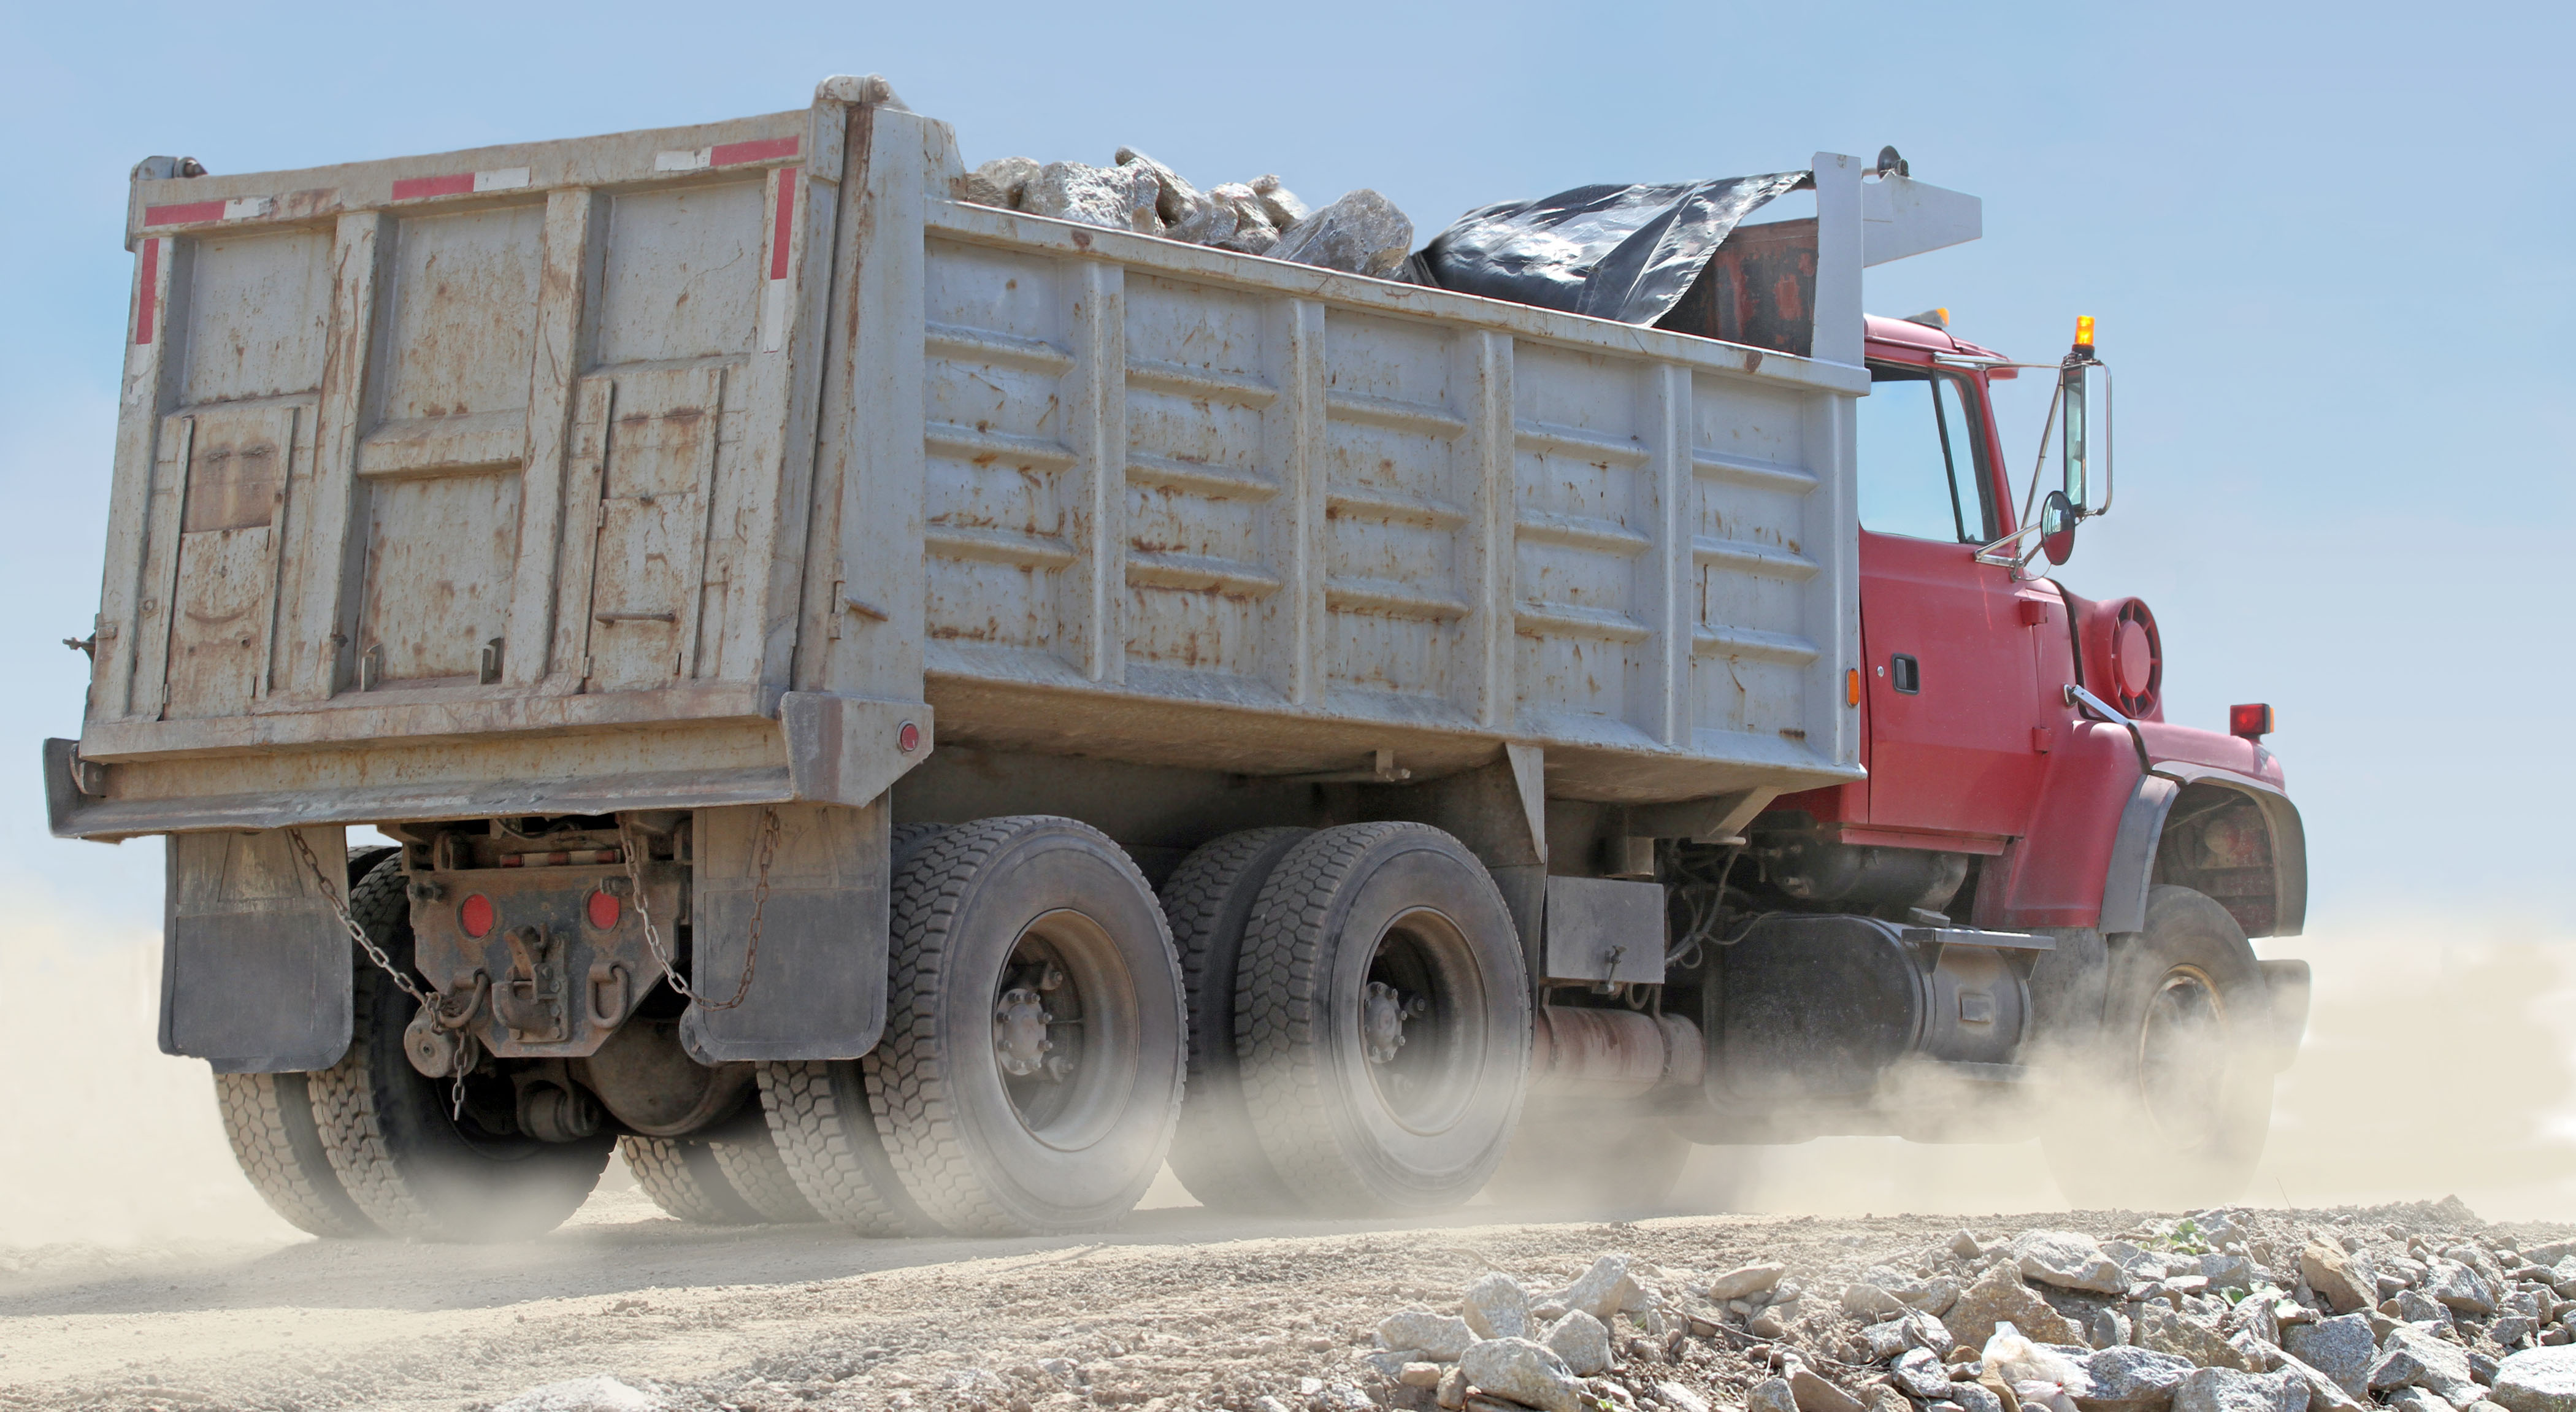 red dump truck transporting boulders on a dusty construction site